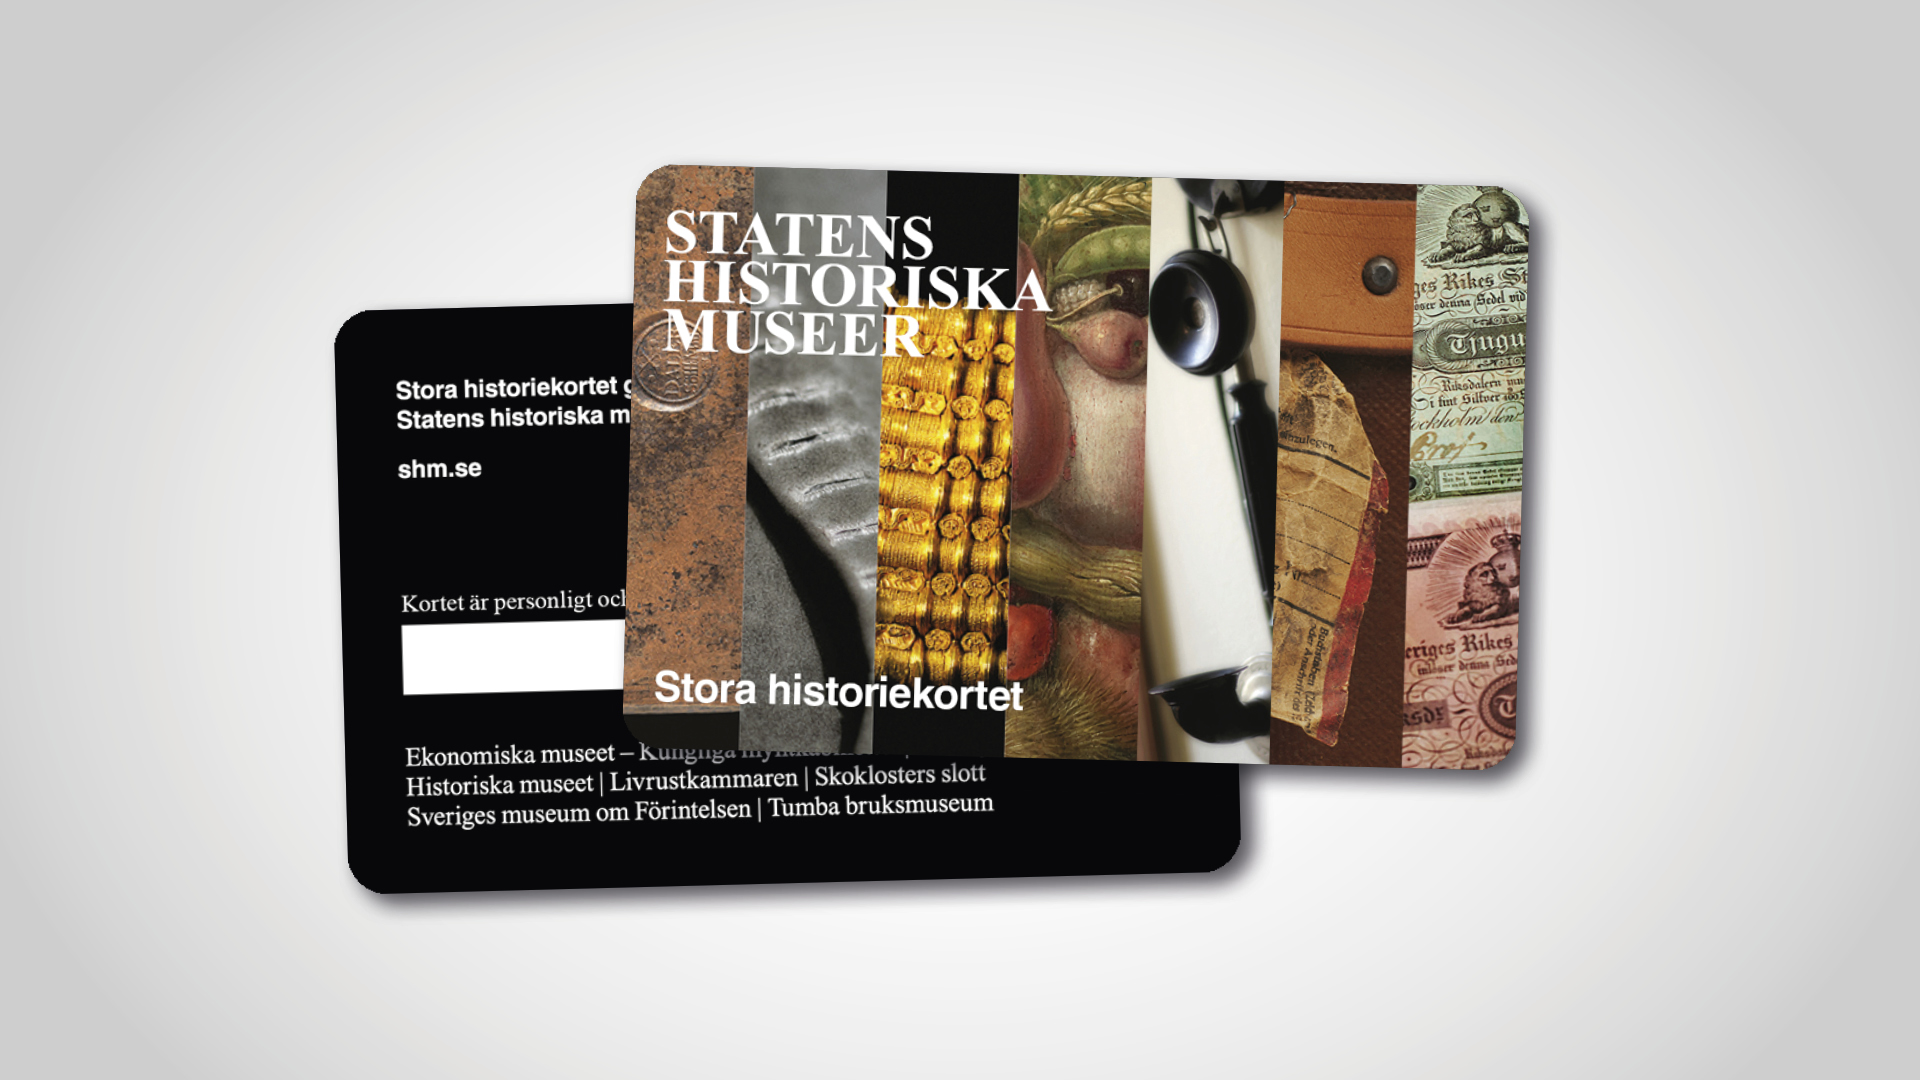 Annual pass for the National Historical Museums, front and back